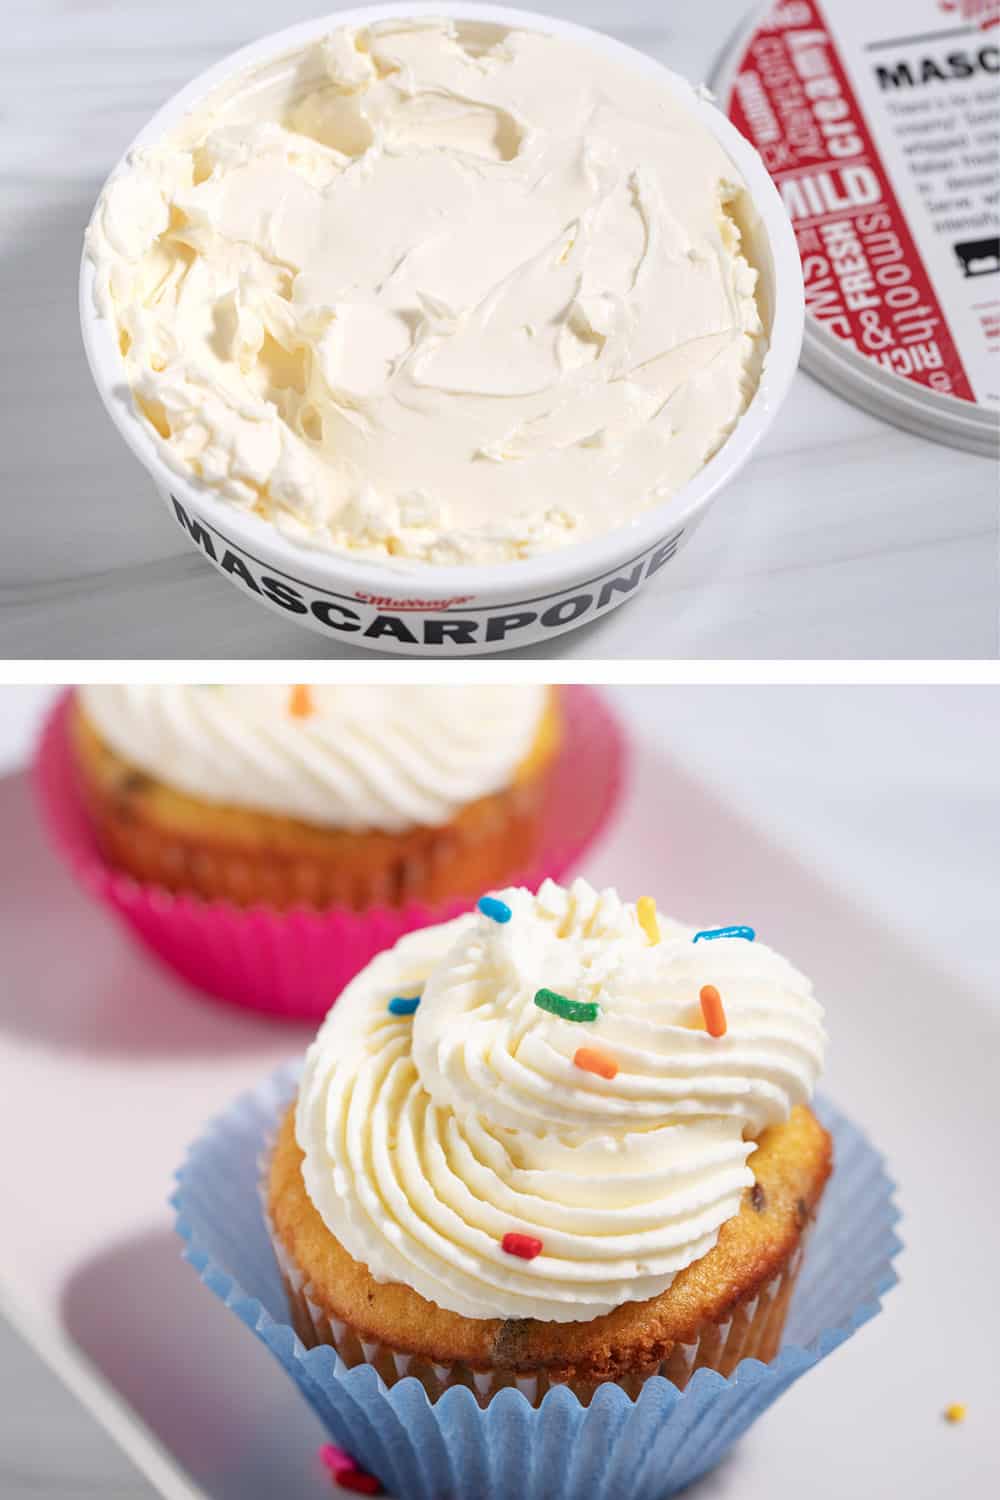 Mascarpone and cupcakes with mascarpone frosting.